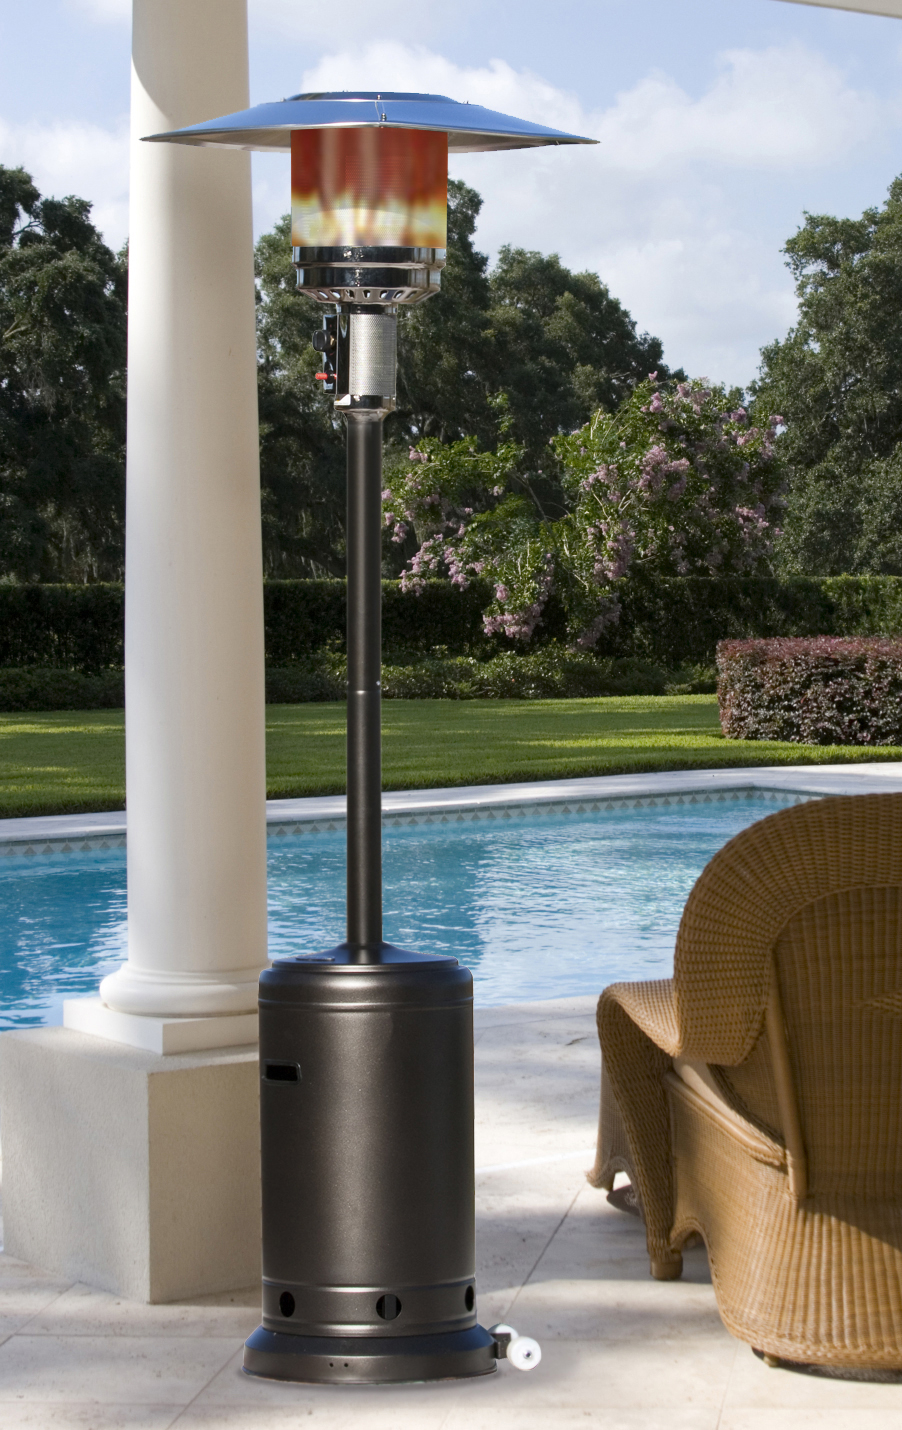 Paramount Full Size Mocha Propane Patio Heater Jr Home intended for proportions 902 X 1430